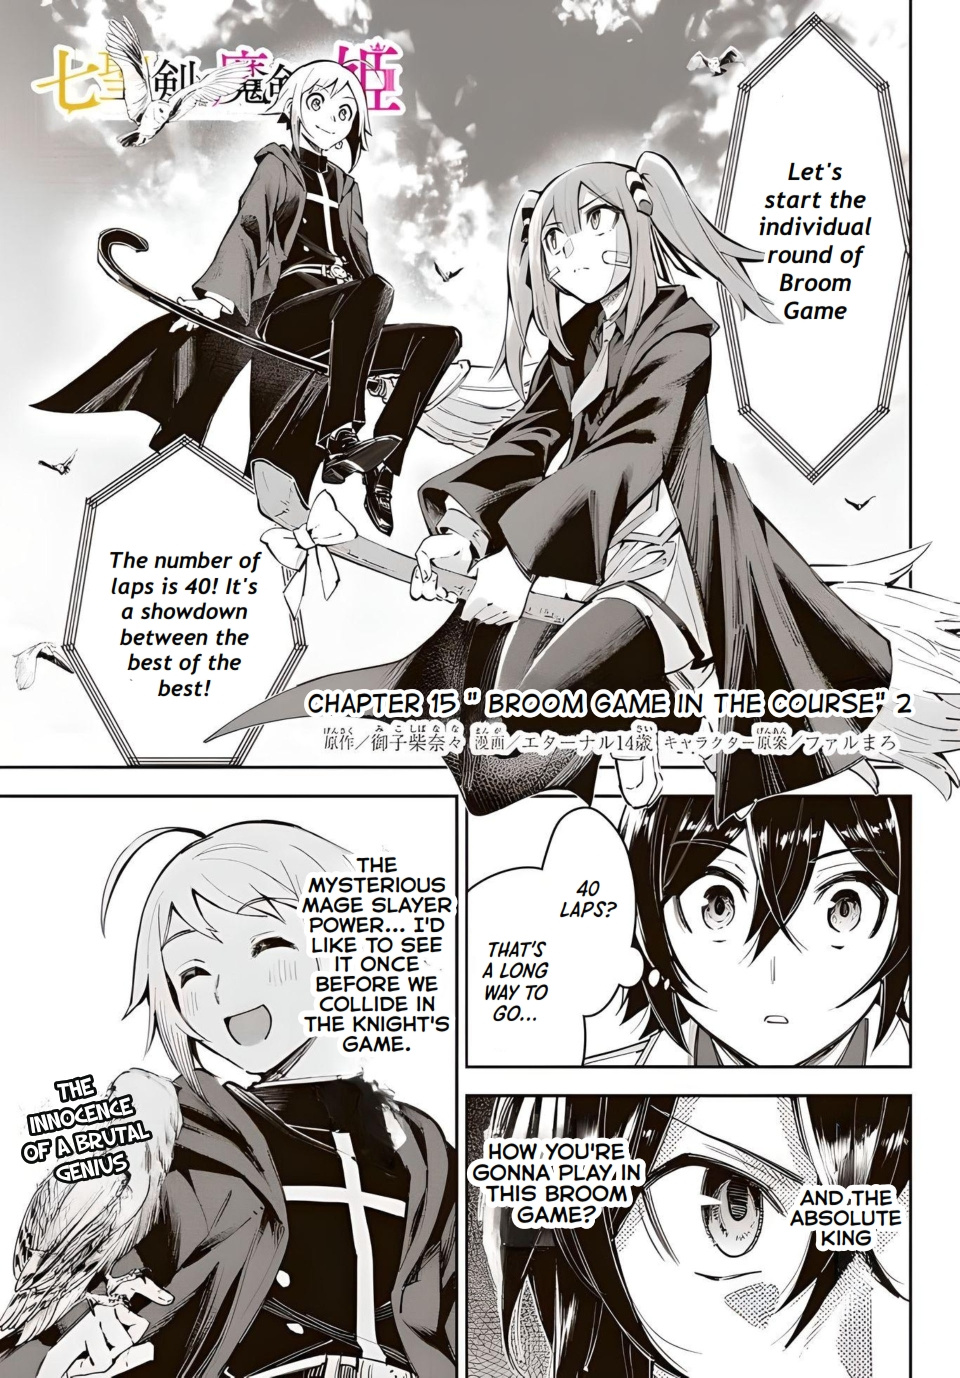 Seven Holy Sword And The Princess Of Magic Sword - Page 2